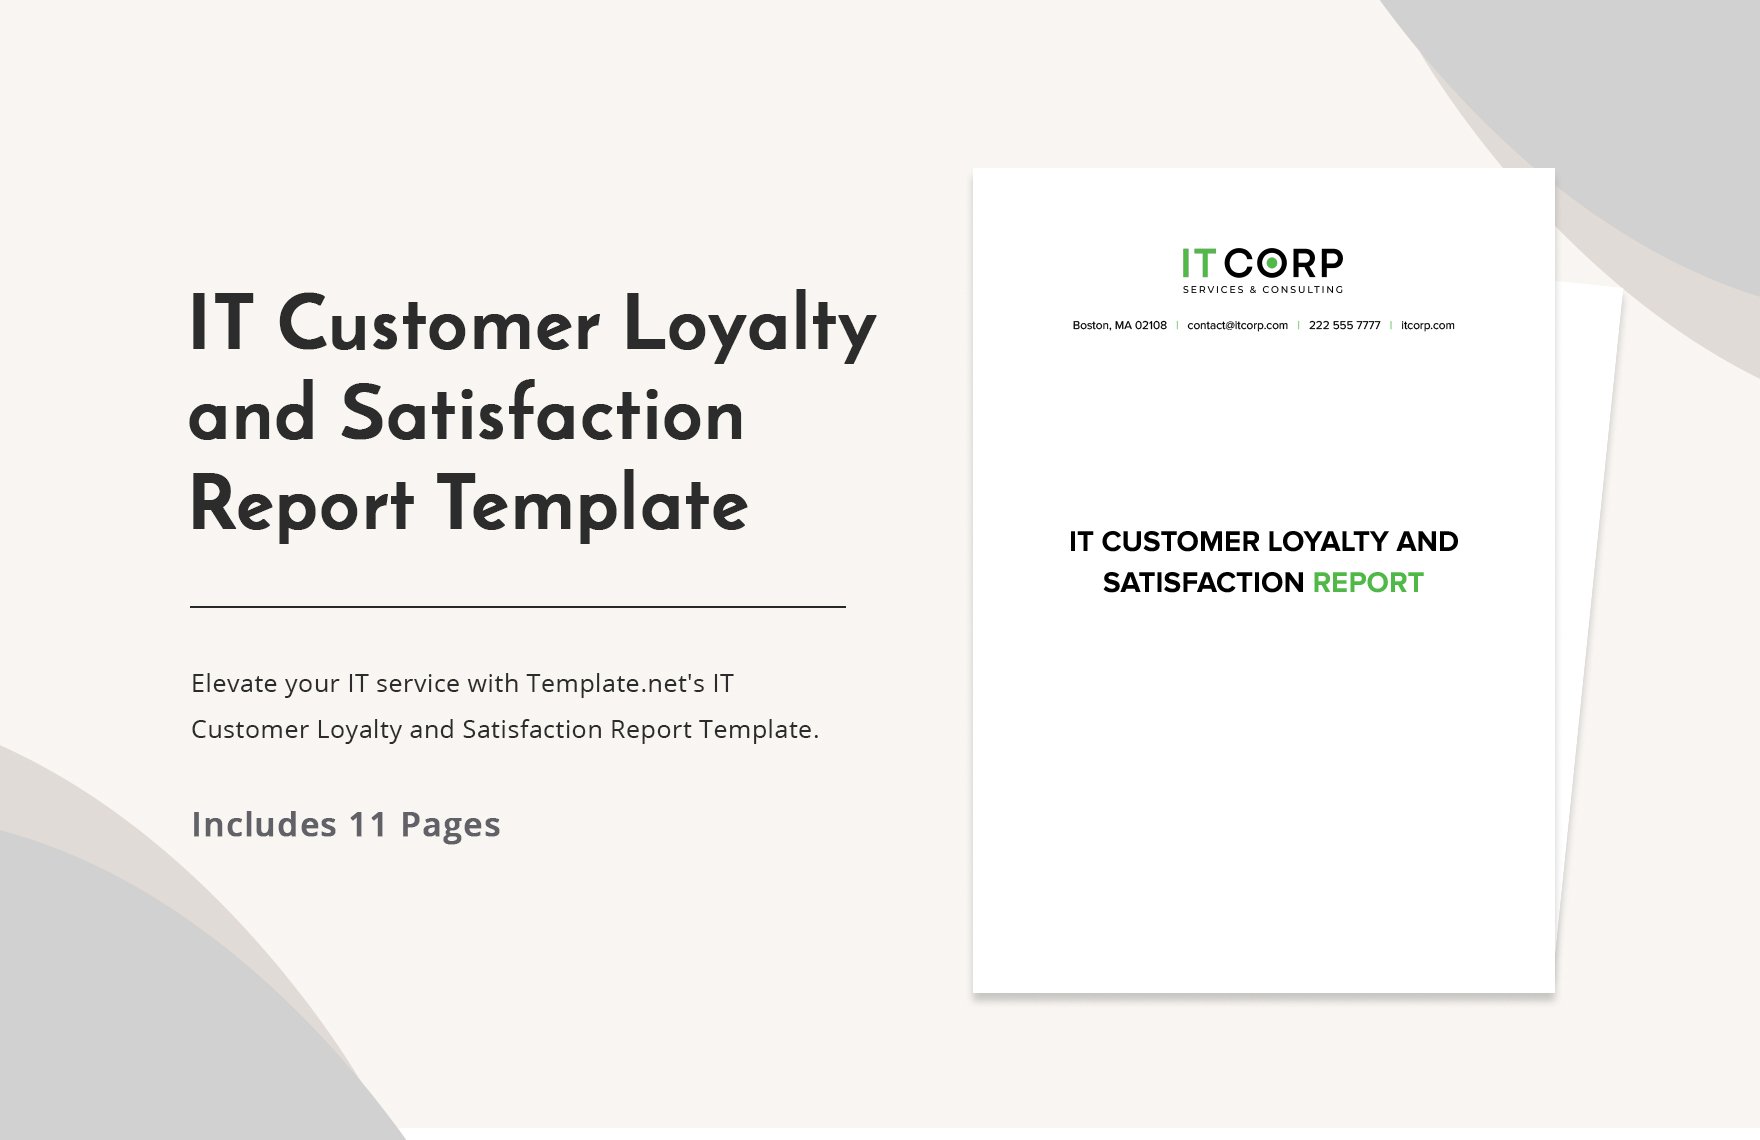 IT Customer Loyalty and Satisfaction Report Template